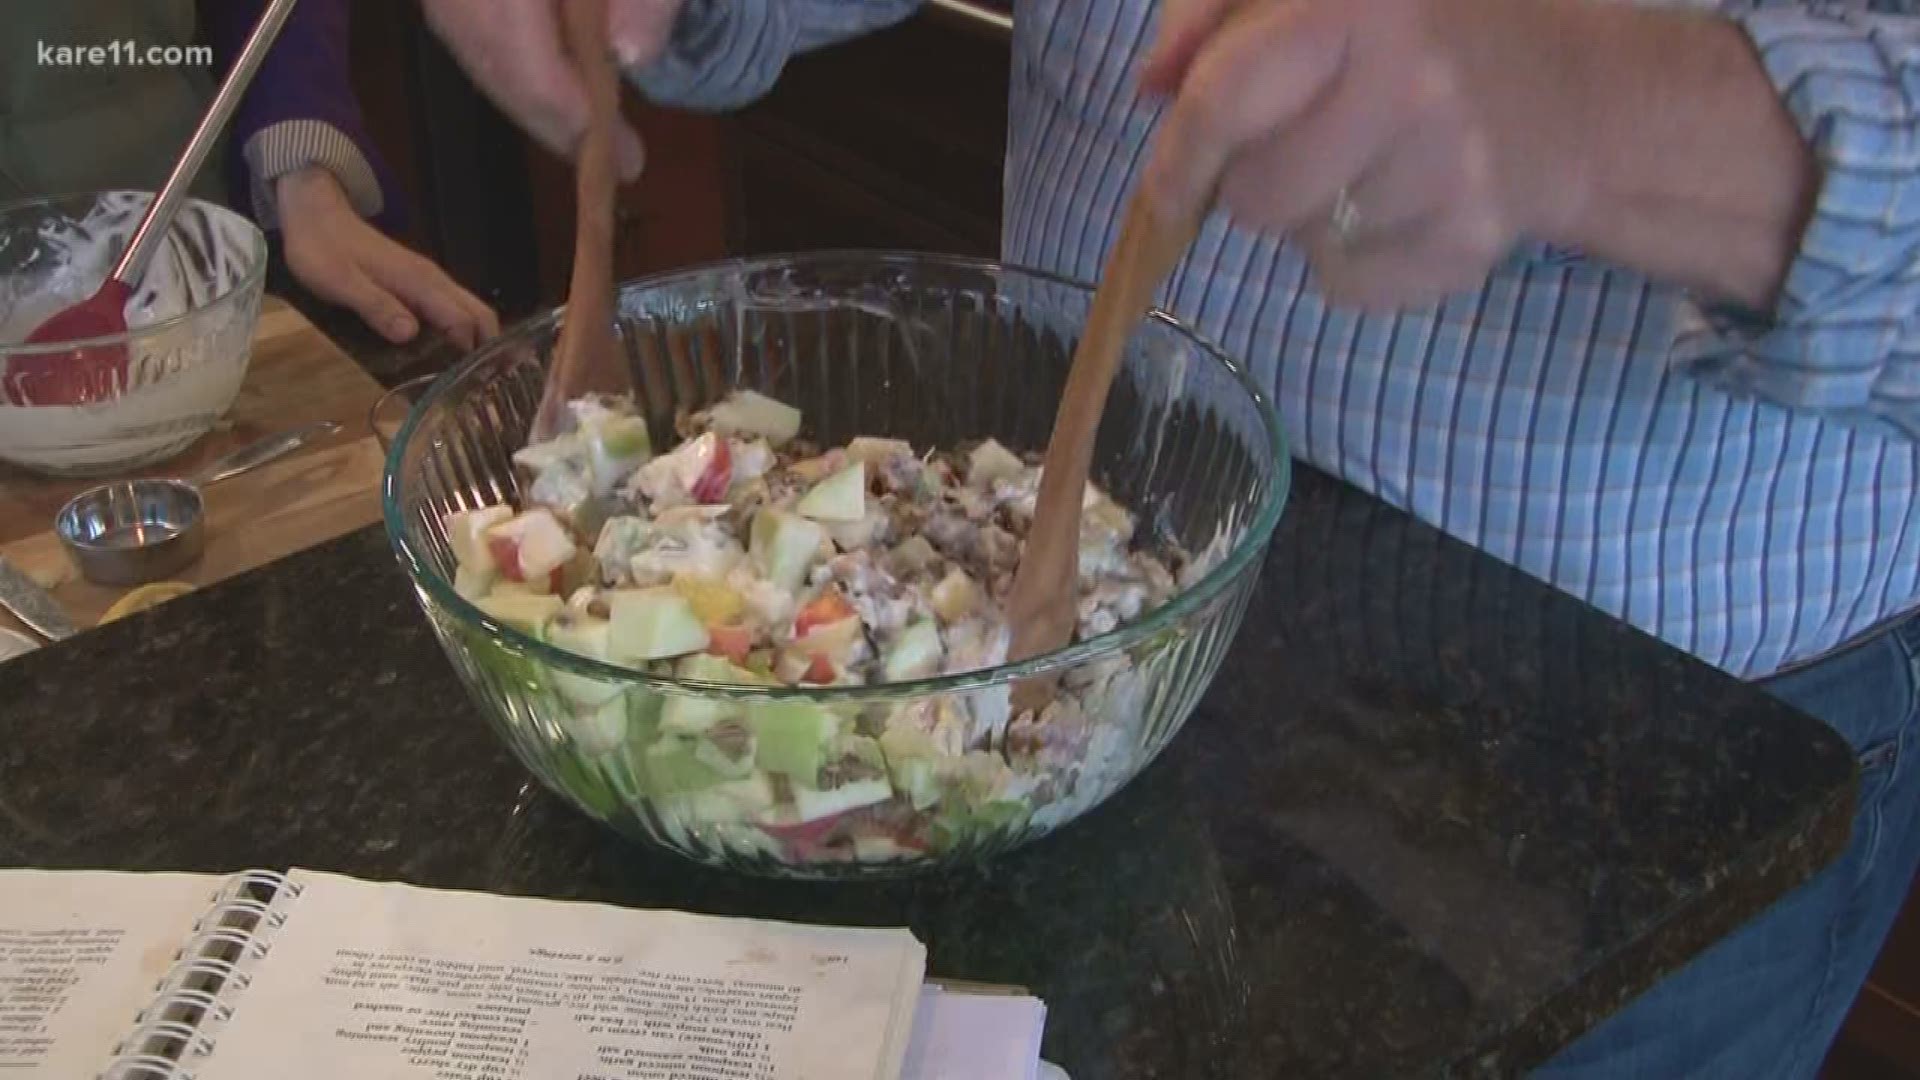 A cold and crunchy waldorf salad to pair with any hot meal this holiday season.

Follow the recipe: https://www.kare11.com/article/news/minnesota-wild-rice-waldorf-salad/89-615398328